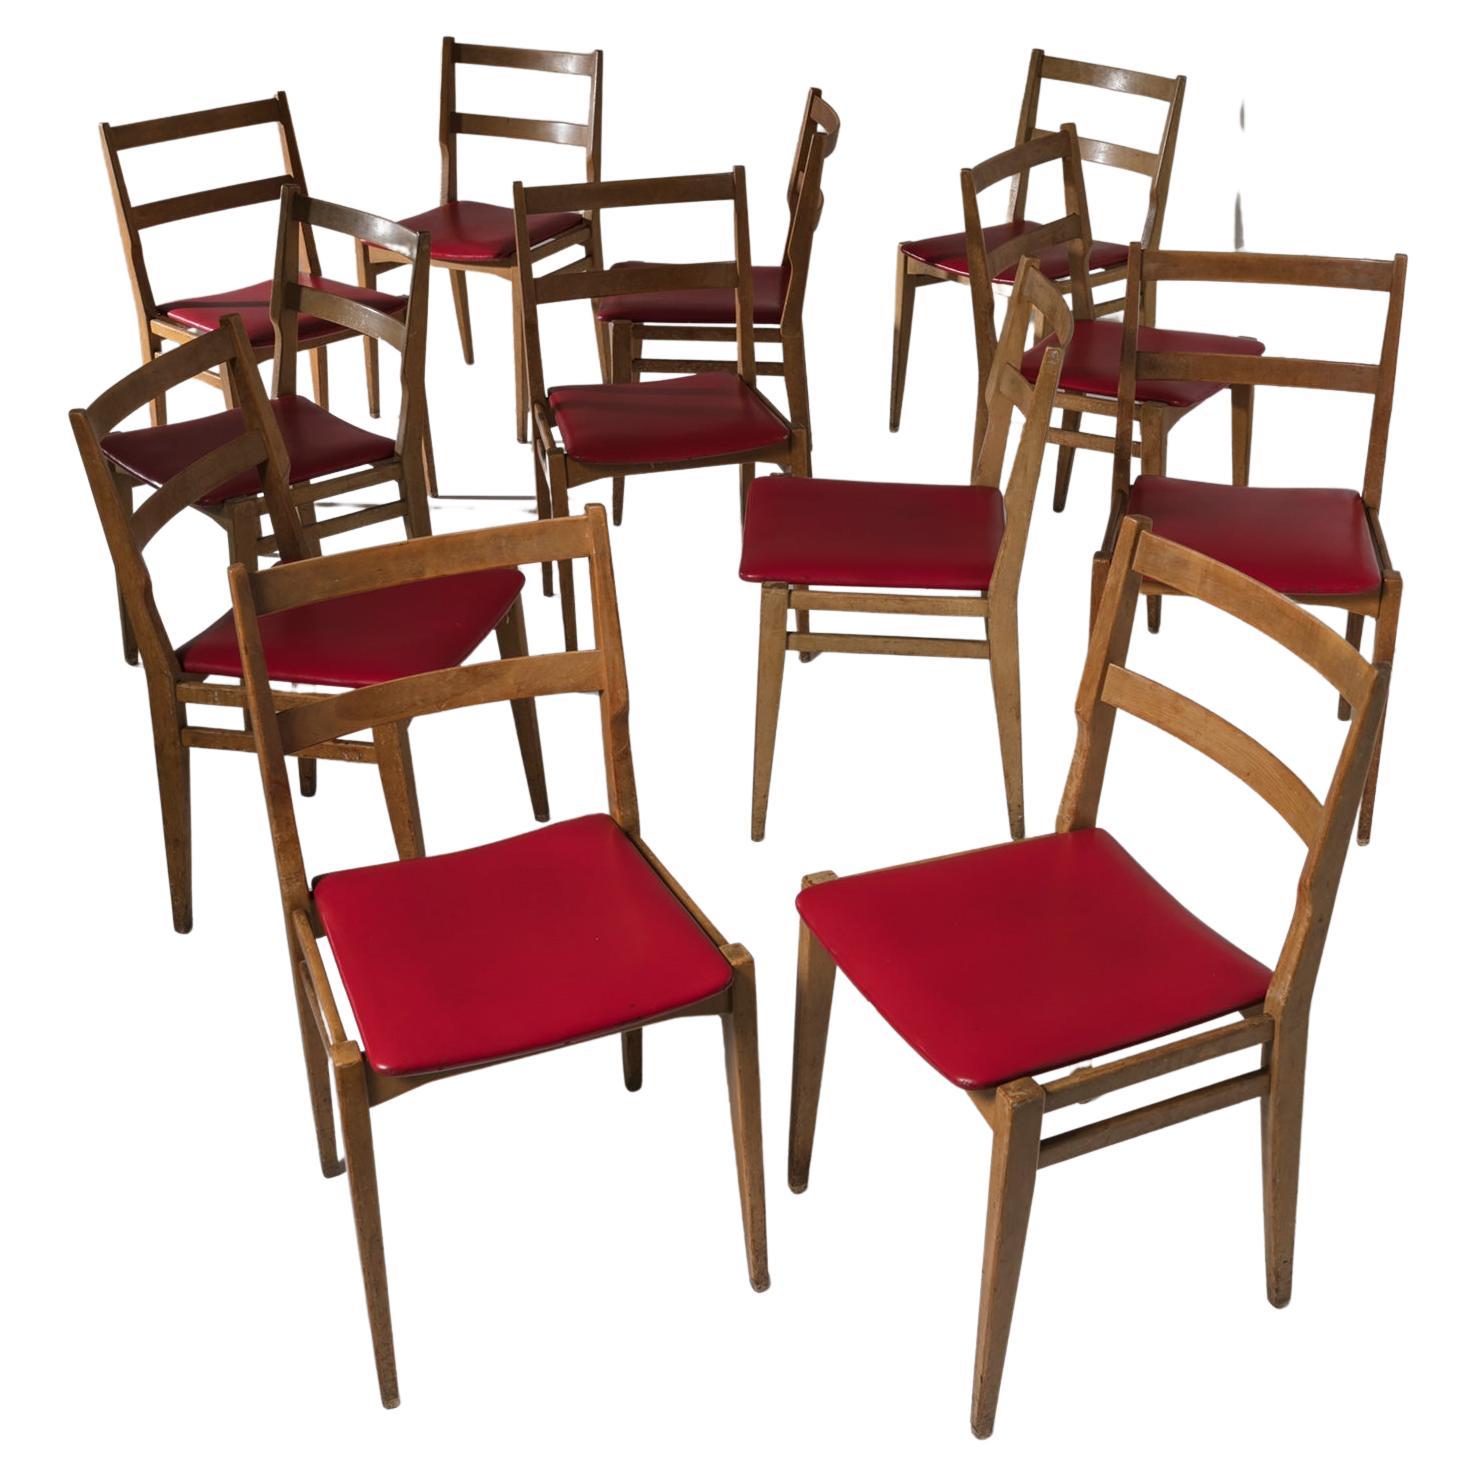 Large set of 12 Wood Chairs "103" by Melchiorre Bega for Cassina, Italy, 1960s For Sale